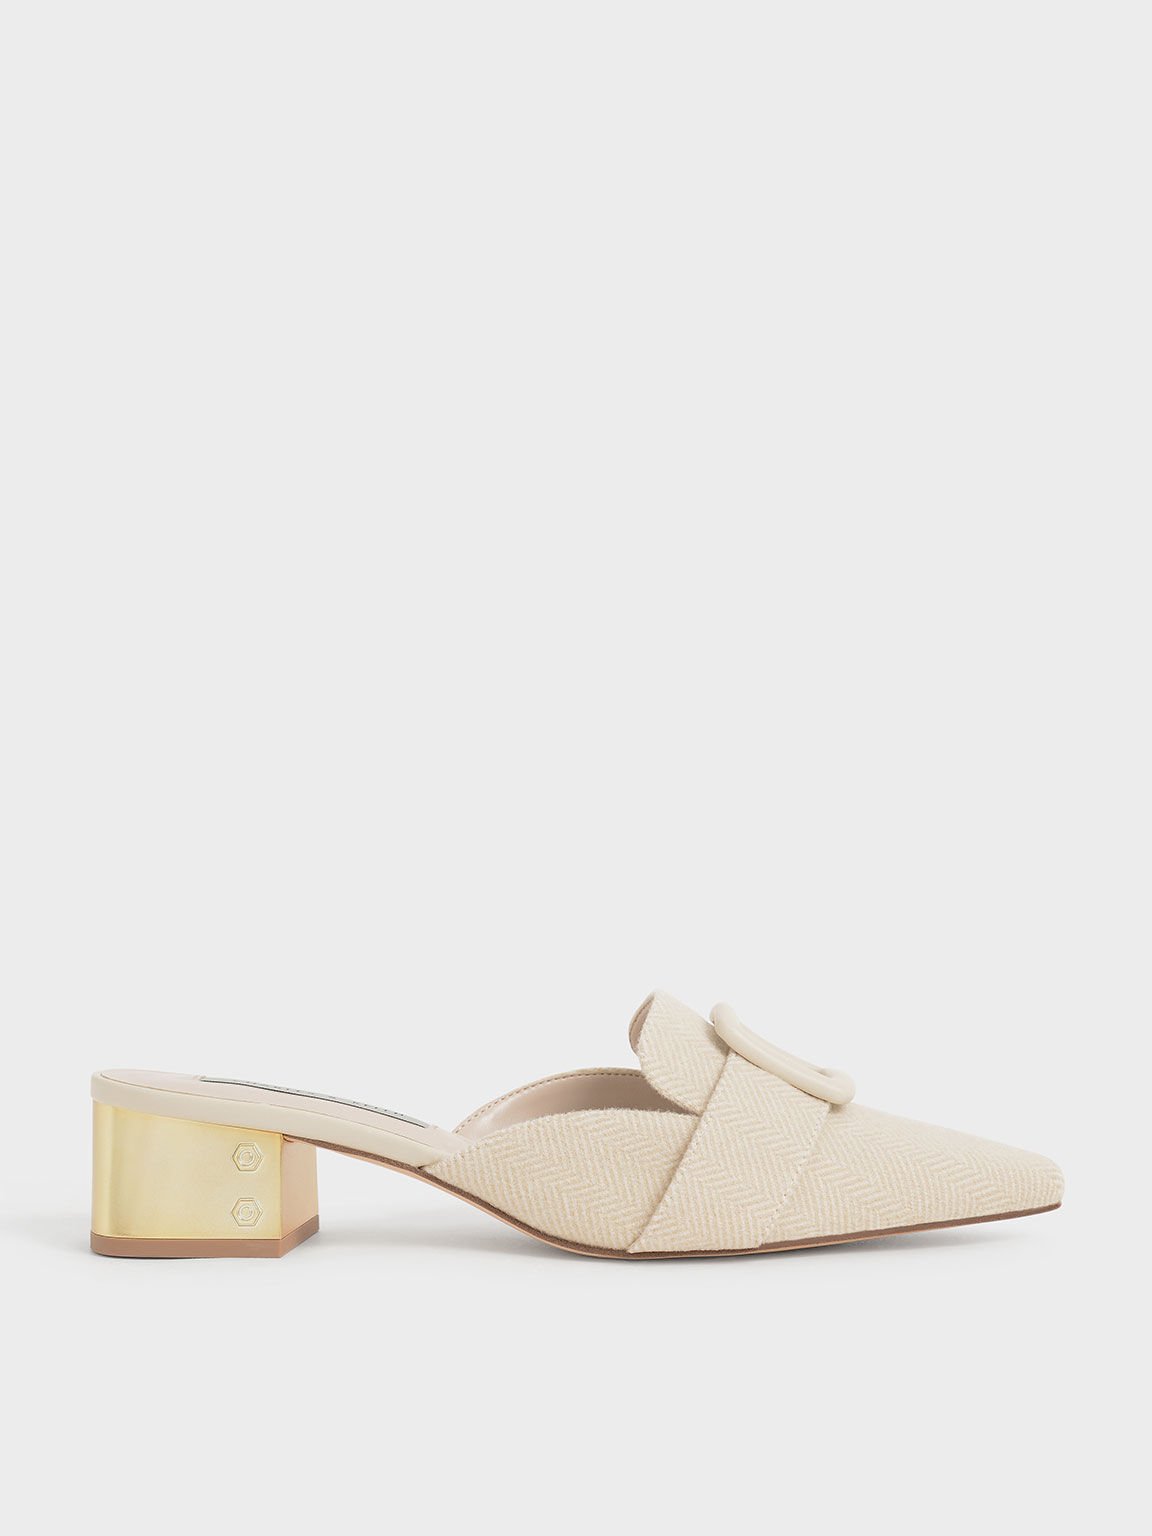 Woven Buckled Mules, Beige, hi-res